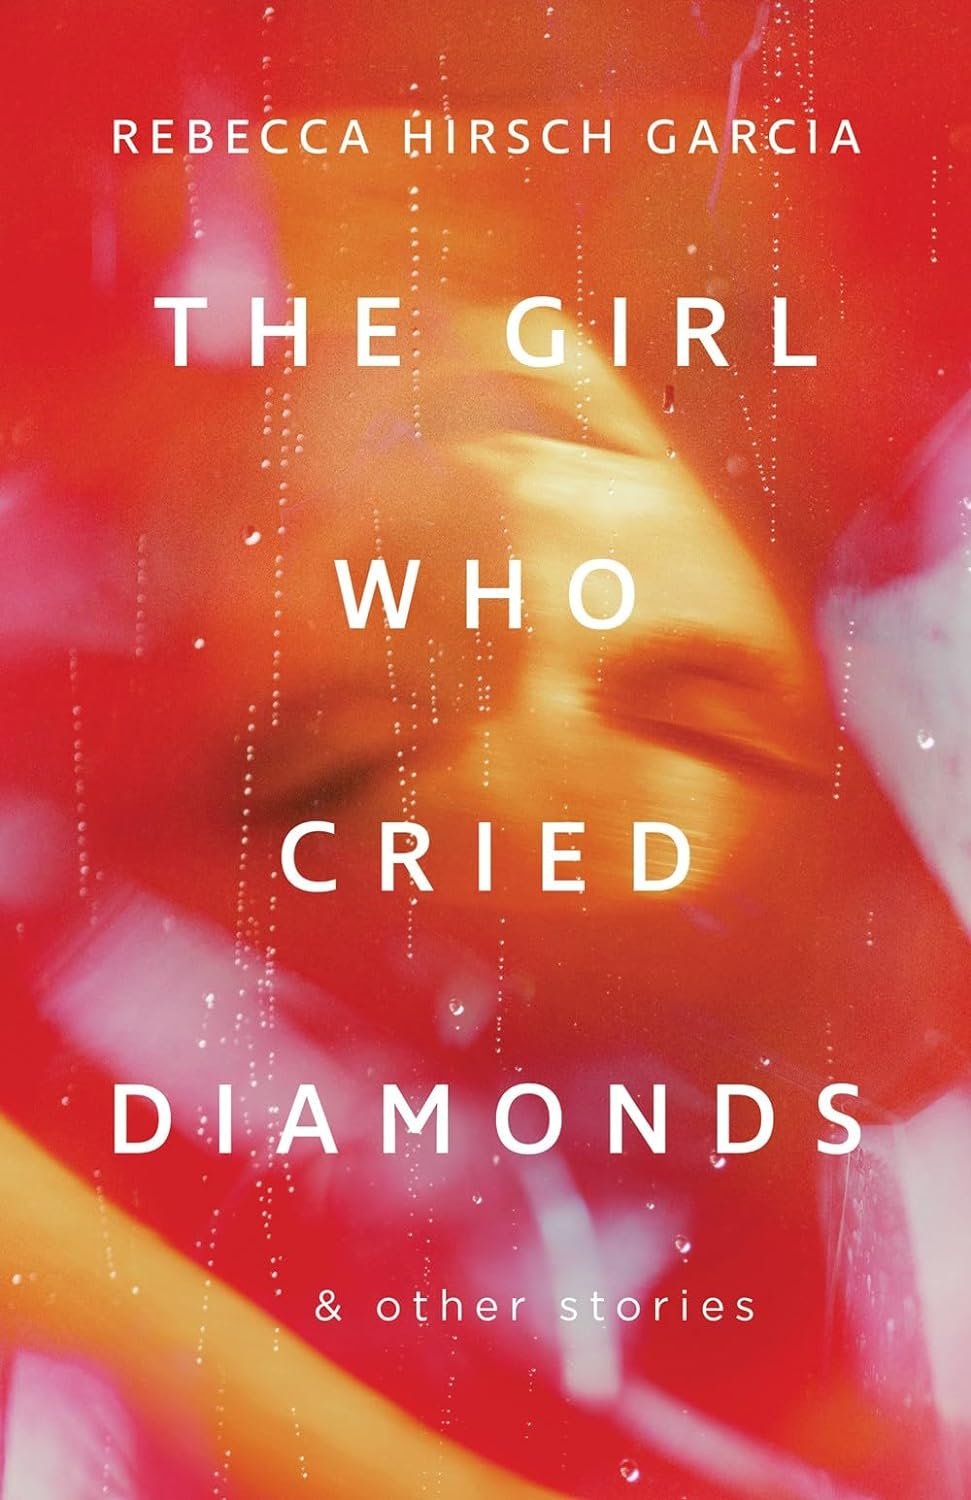 Garcia, Rebecca Hirsch - The Girl Who Cried Diamonds & Other Stories - cover.jpg